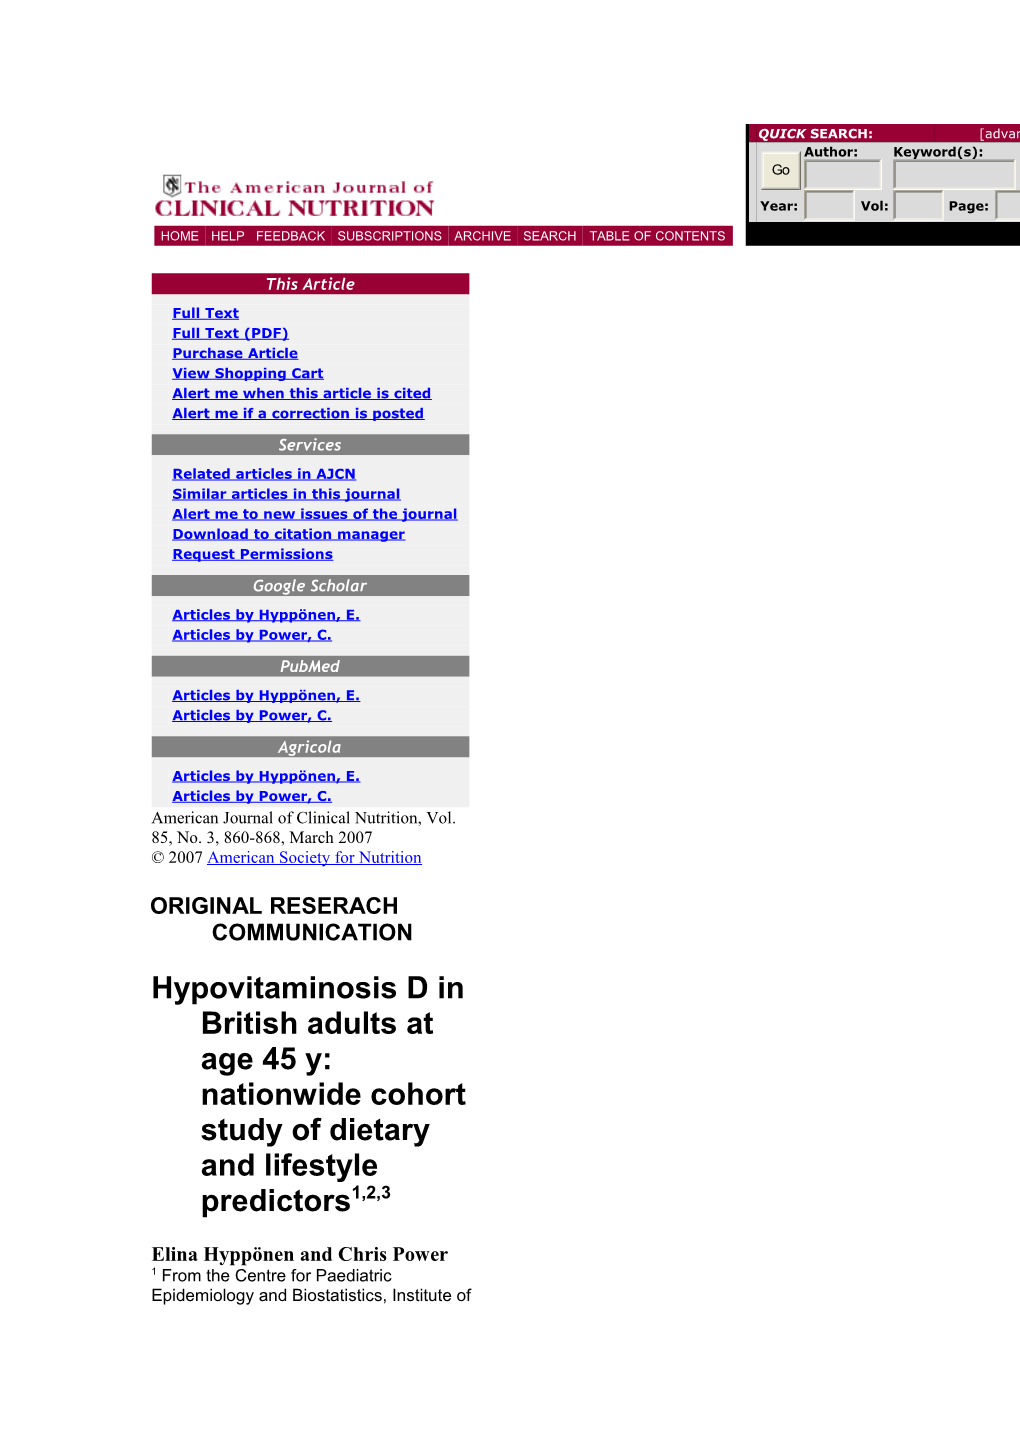 Hypovitaminosis D in British Adults at Age 45 Y: Nationwide Cohort Study of Dietary And